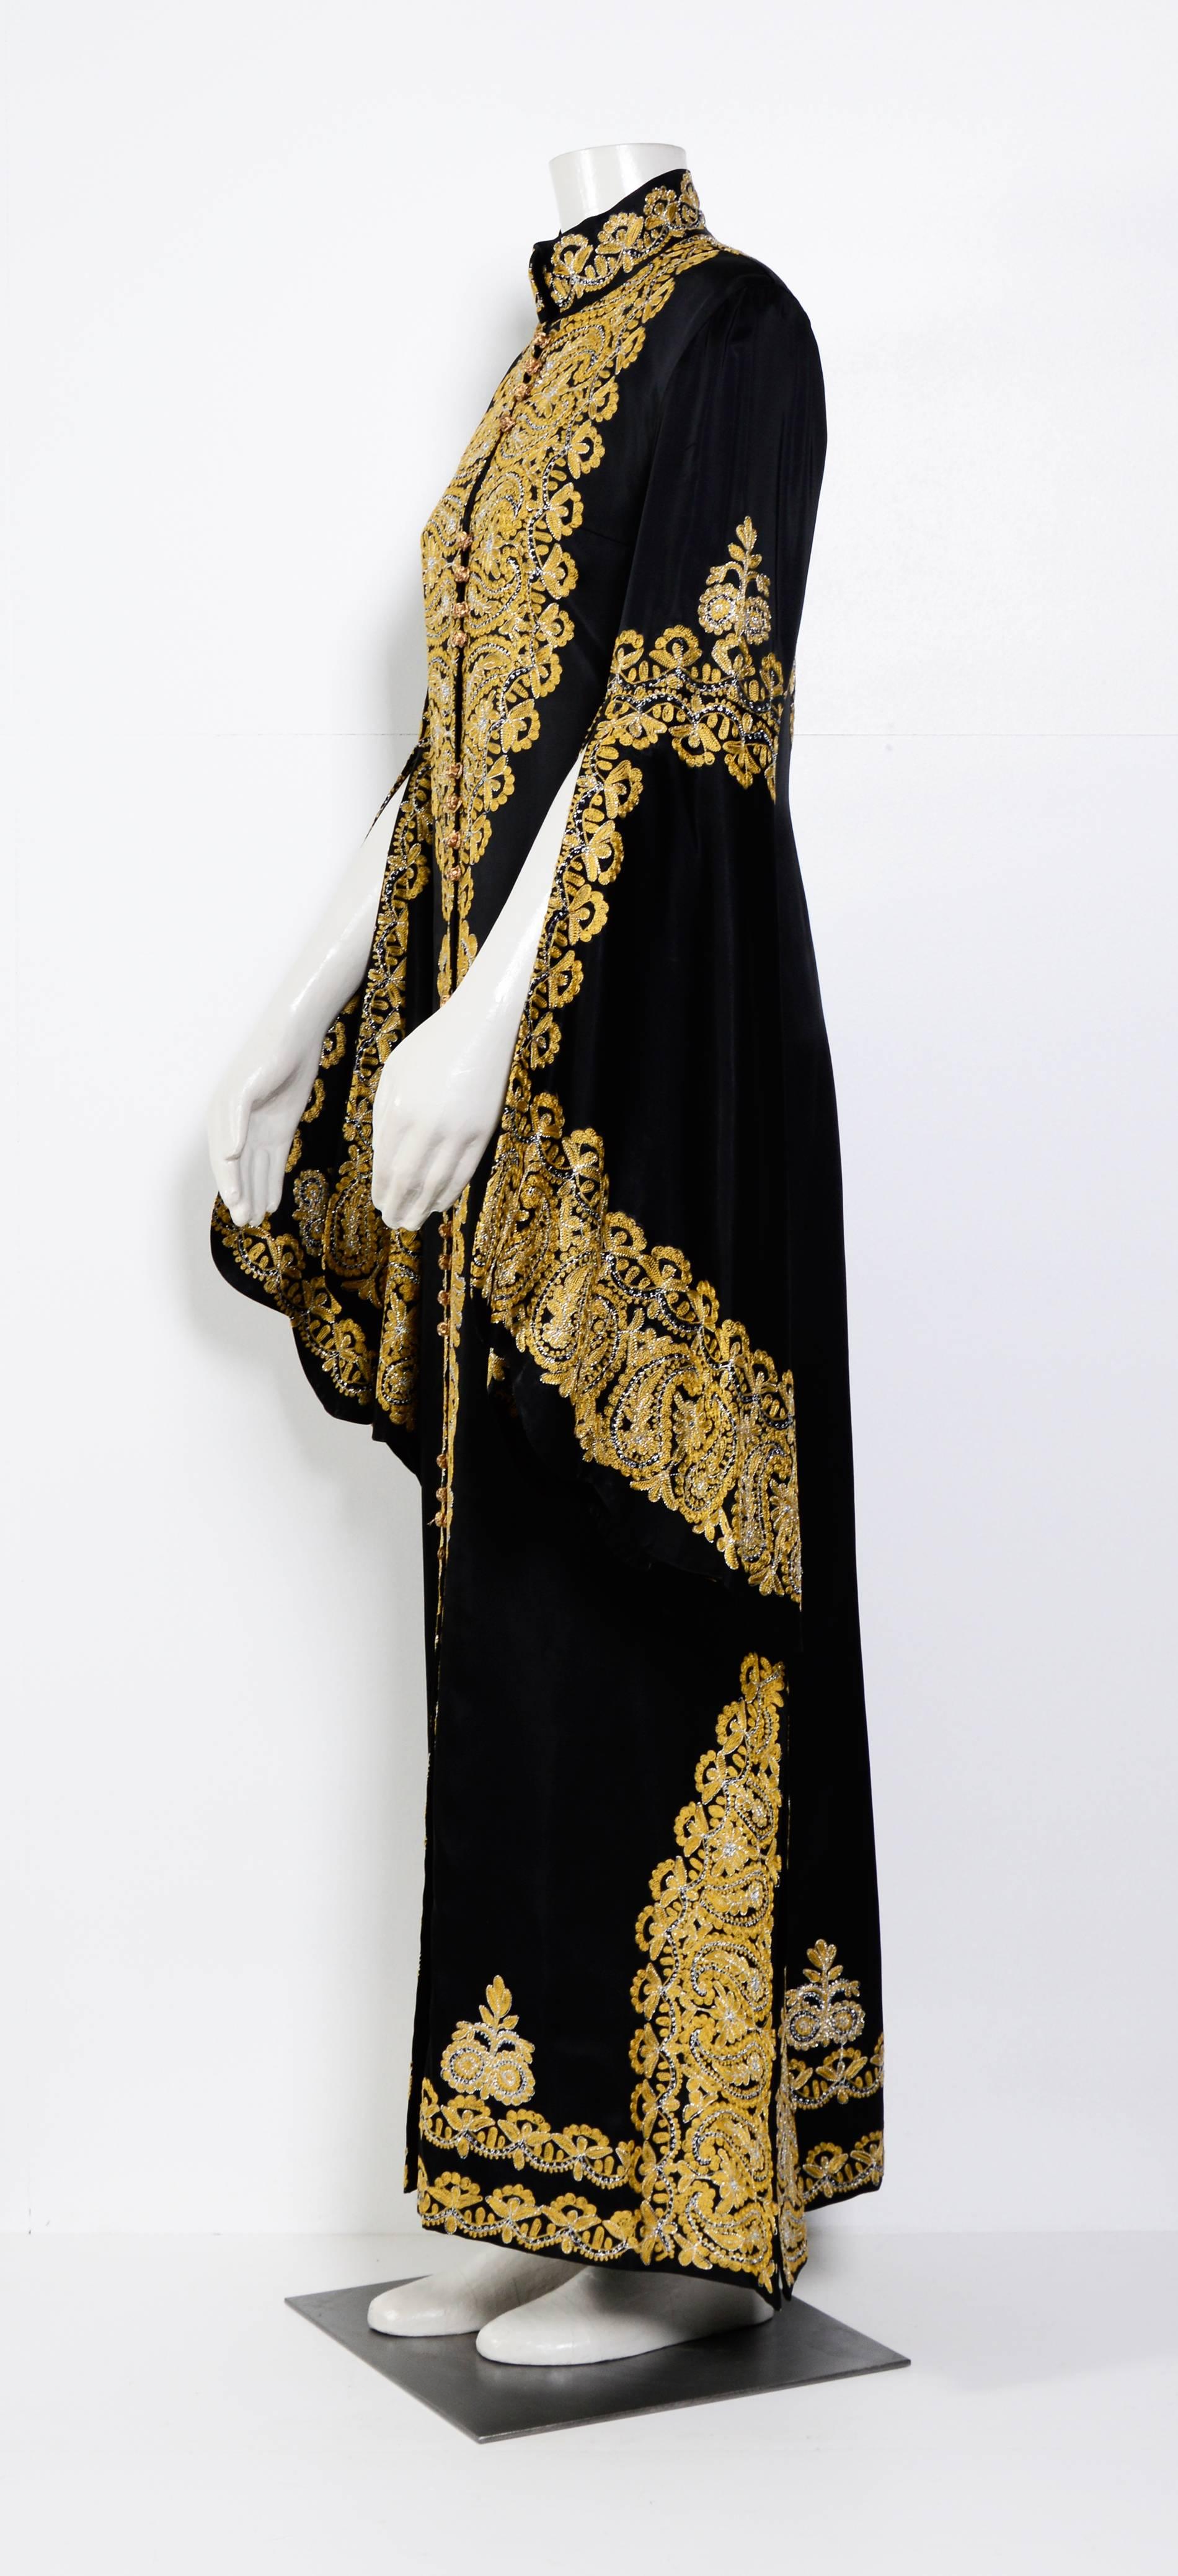 Stunning!! 60's Vintage Moroccan caftan. Black silk features elaborate metallic embroidery front and back. Item buttons down front center. Lined. Couture made
Measurements taken flat in inches
SH to SH 16,5